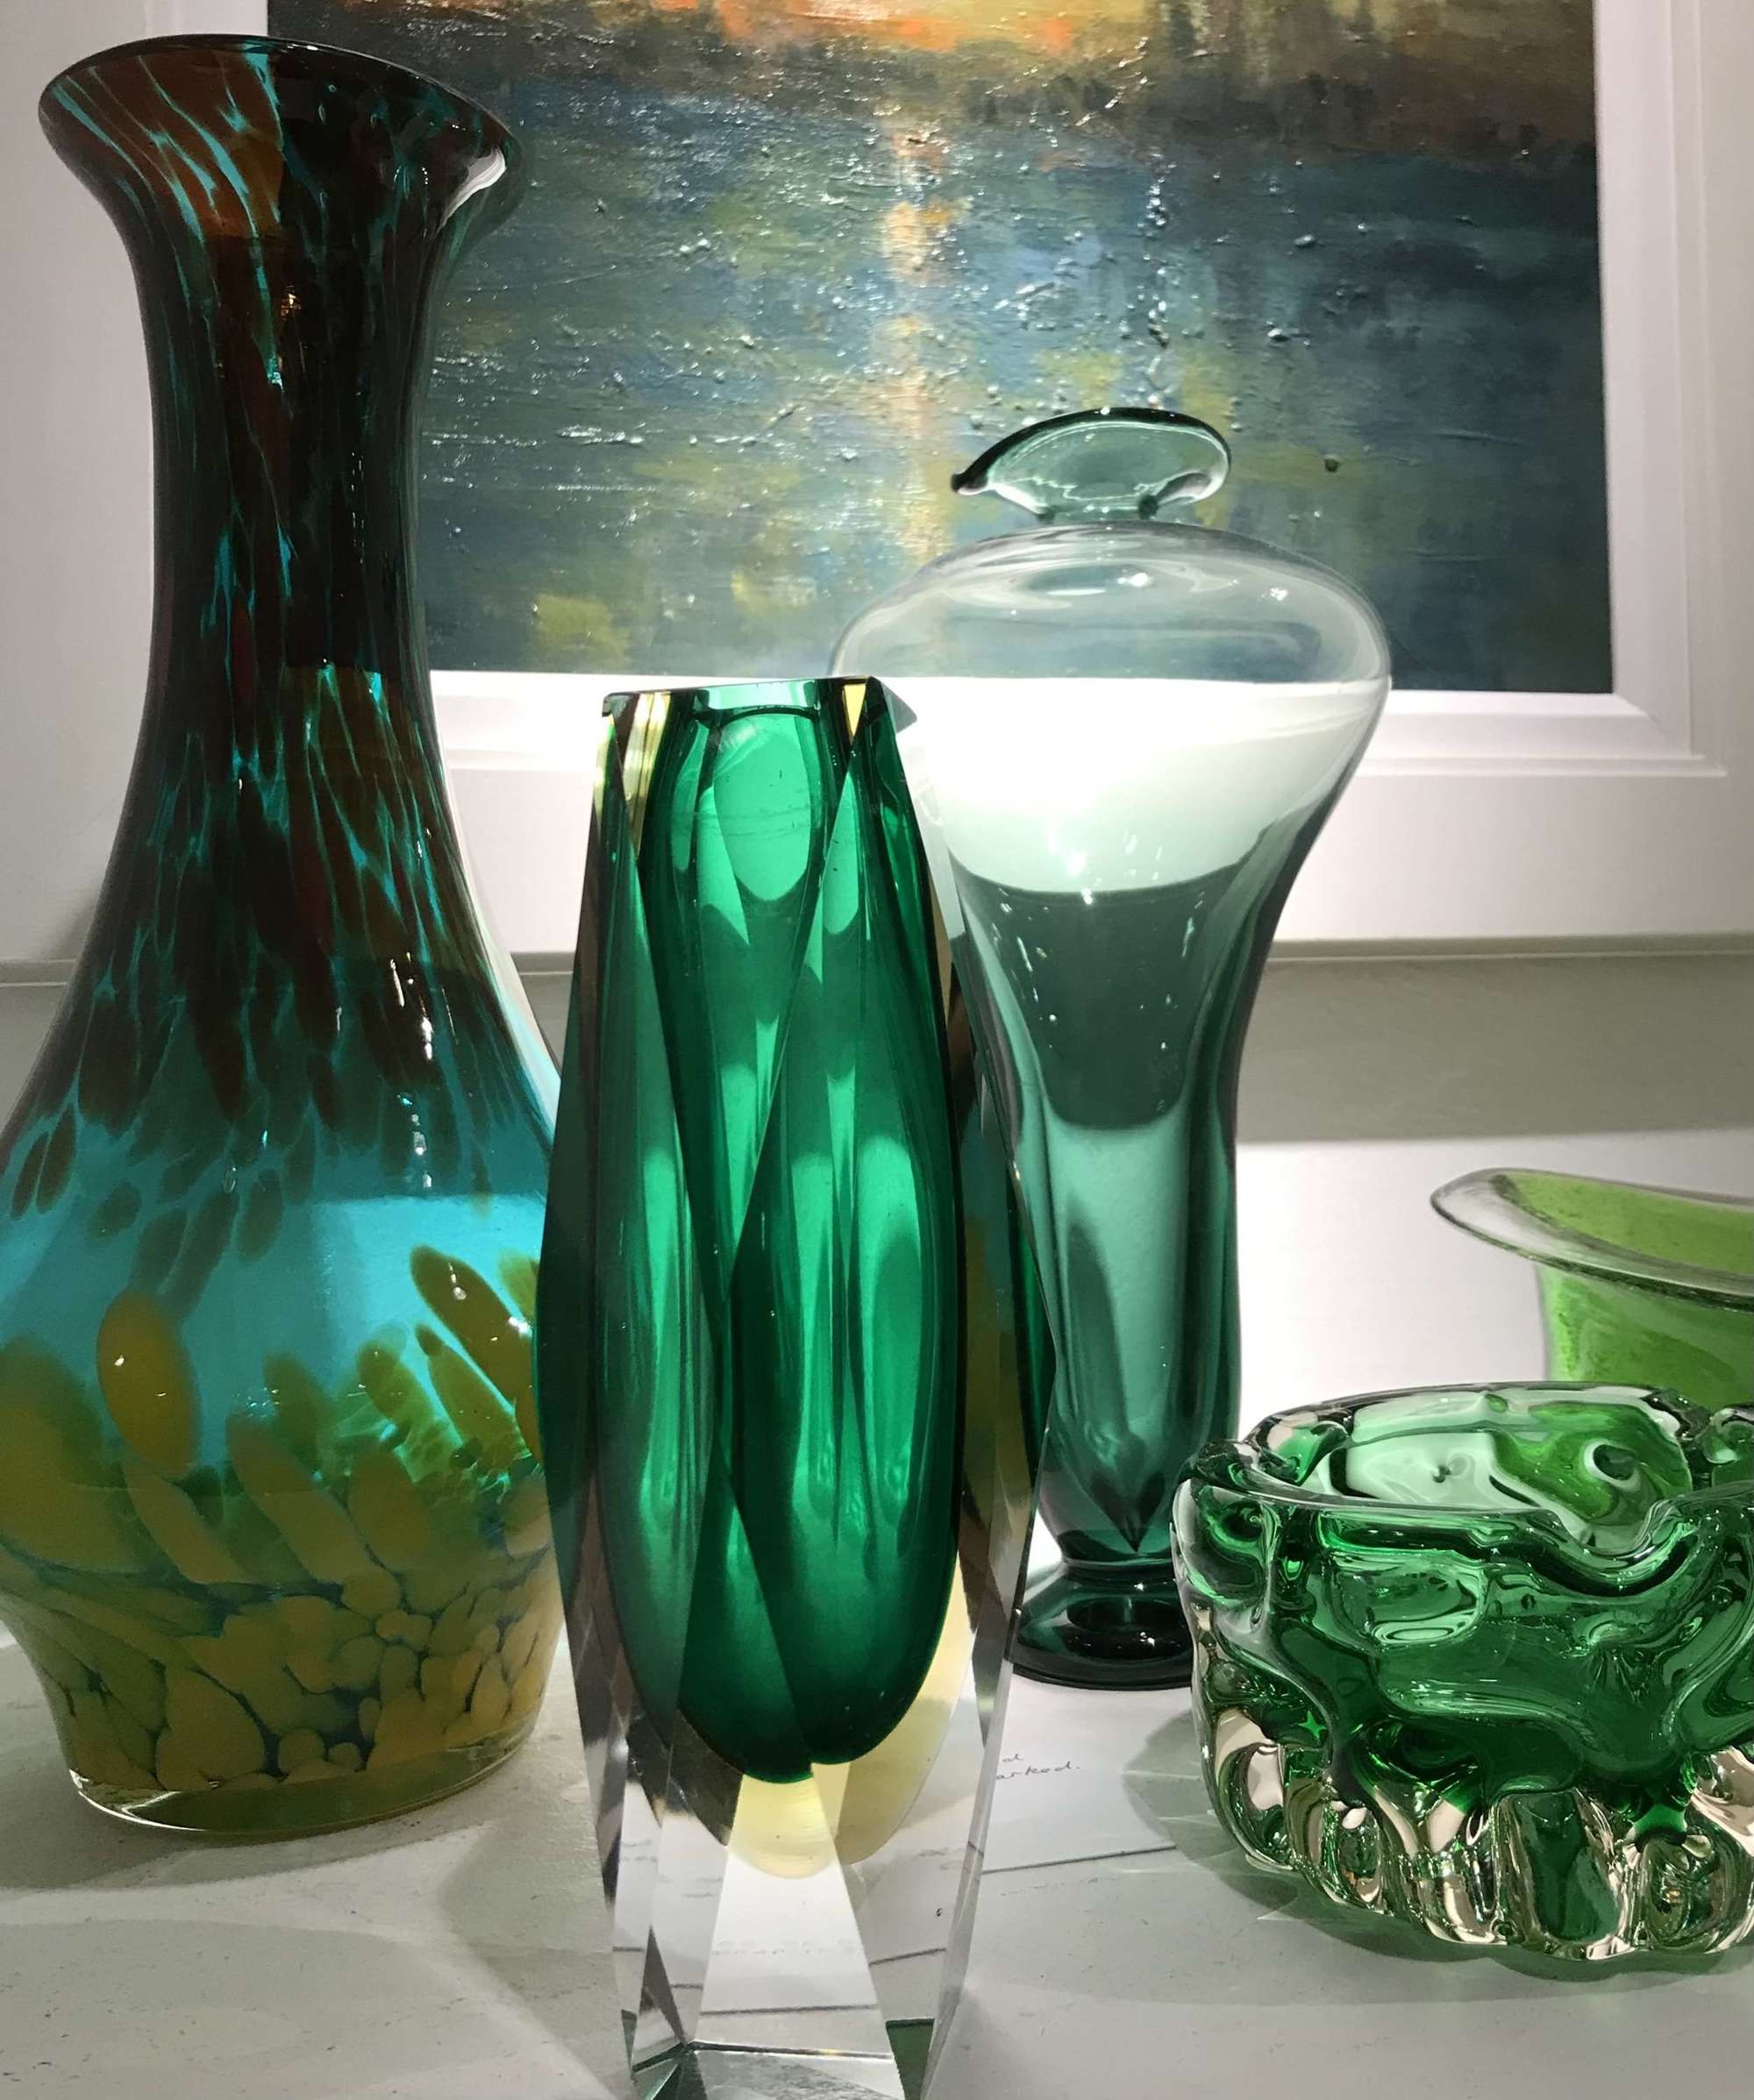 Studio glass - please contact us for details of current stock.